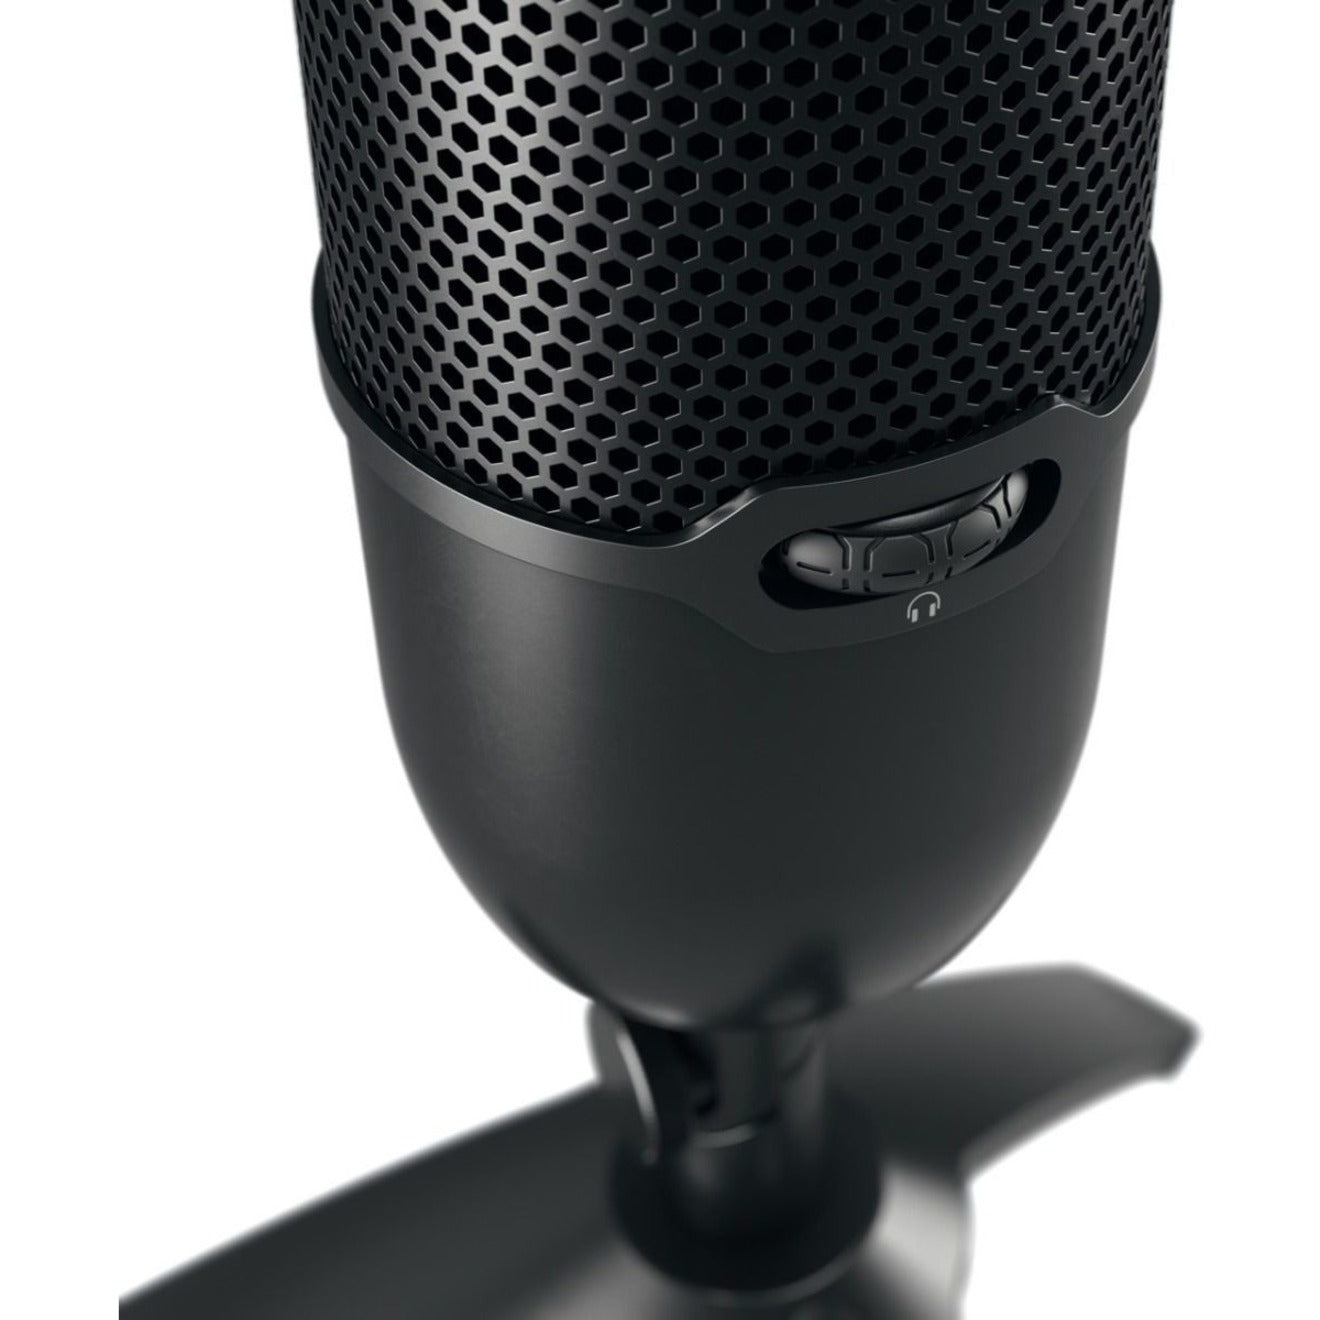 CHERRY JA-0700 UM 3.0 Microphone, Wired Stand Mountable Cardioid Mic for Recording, Live Streaming, and Voice